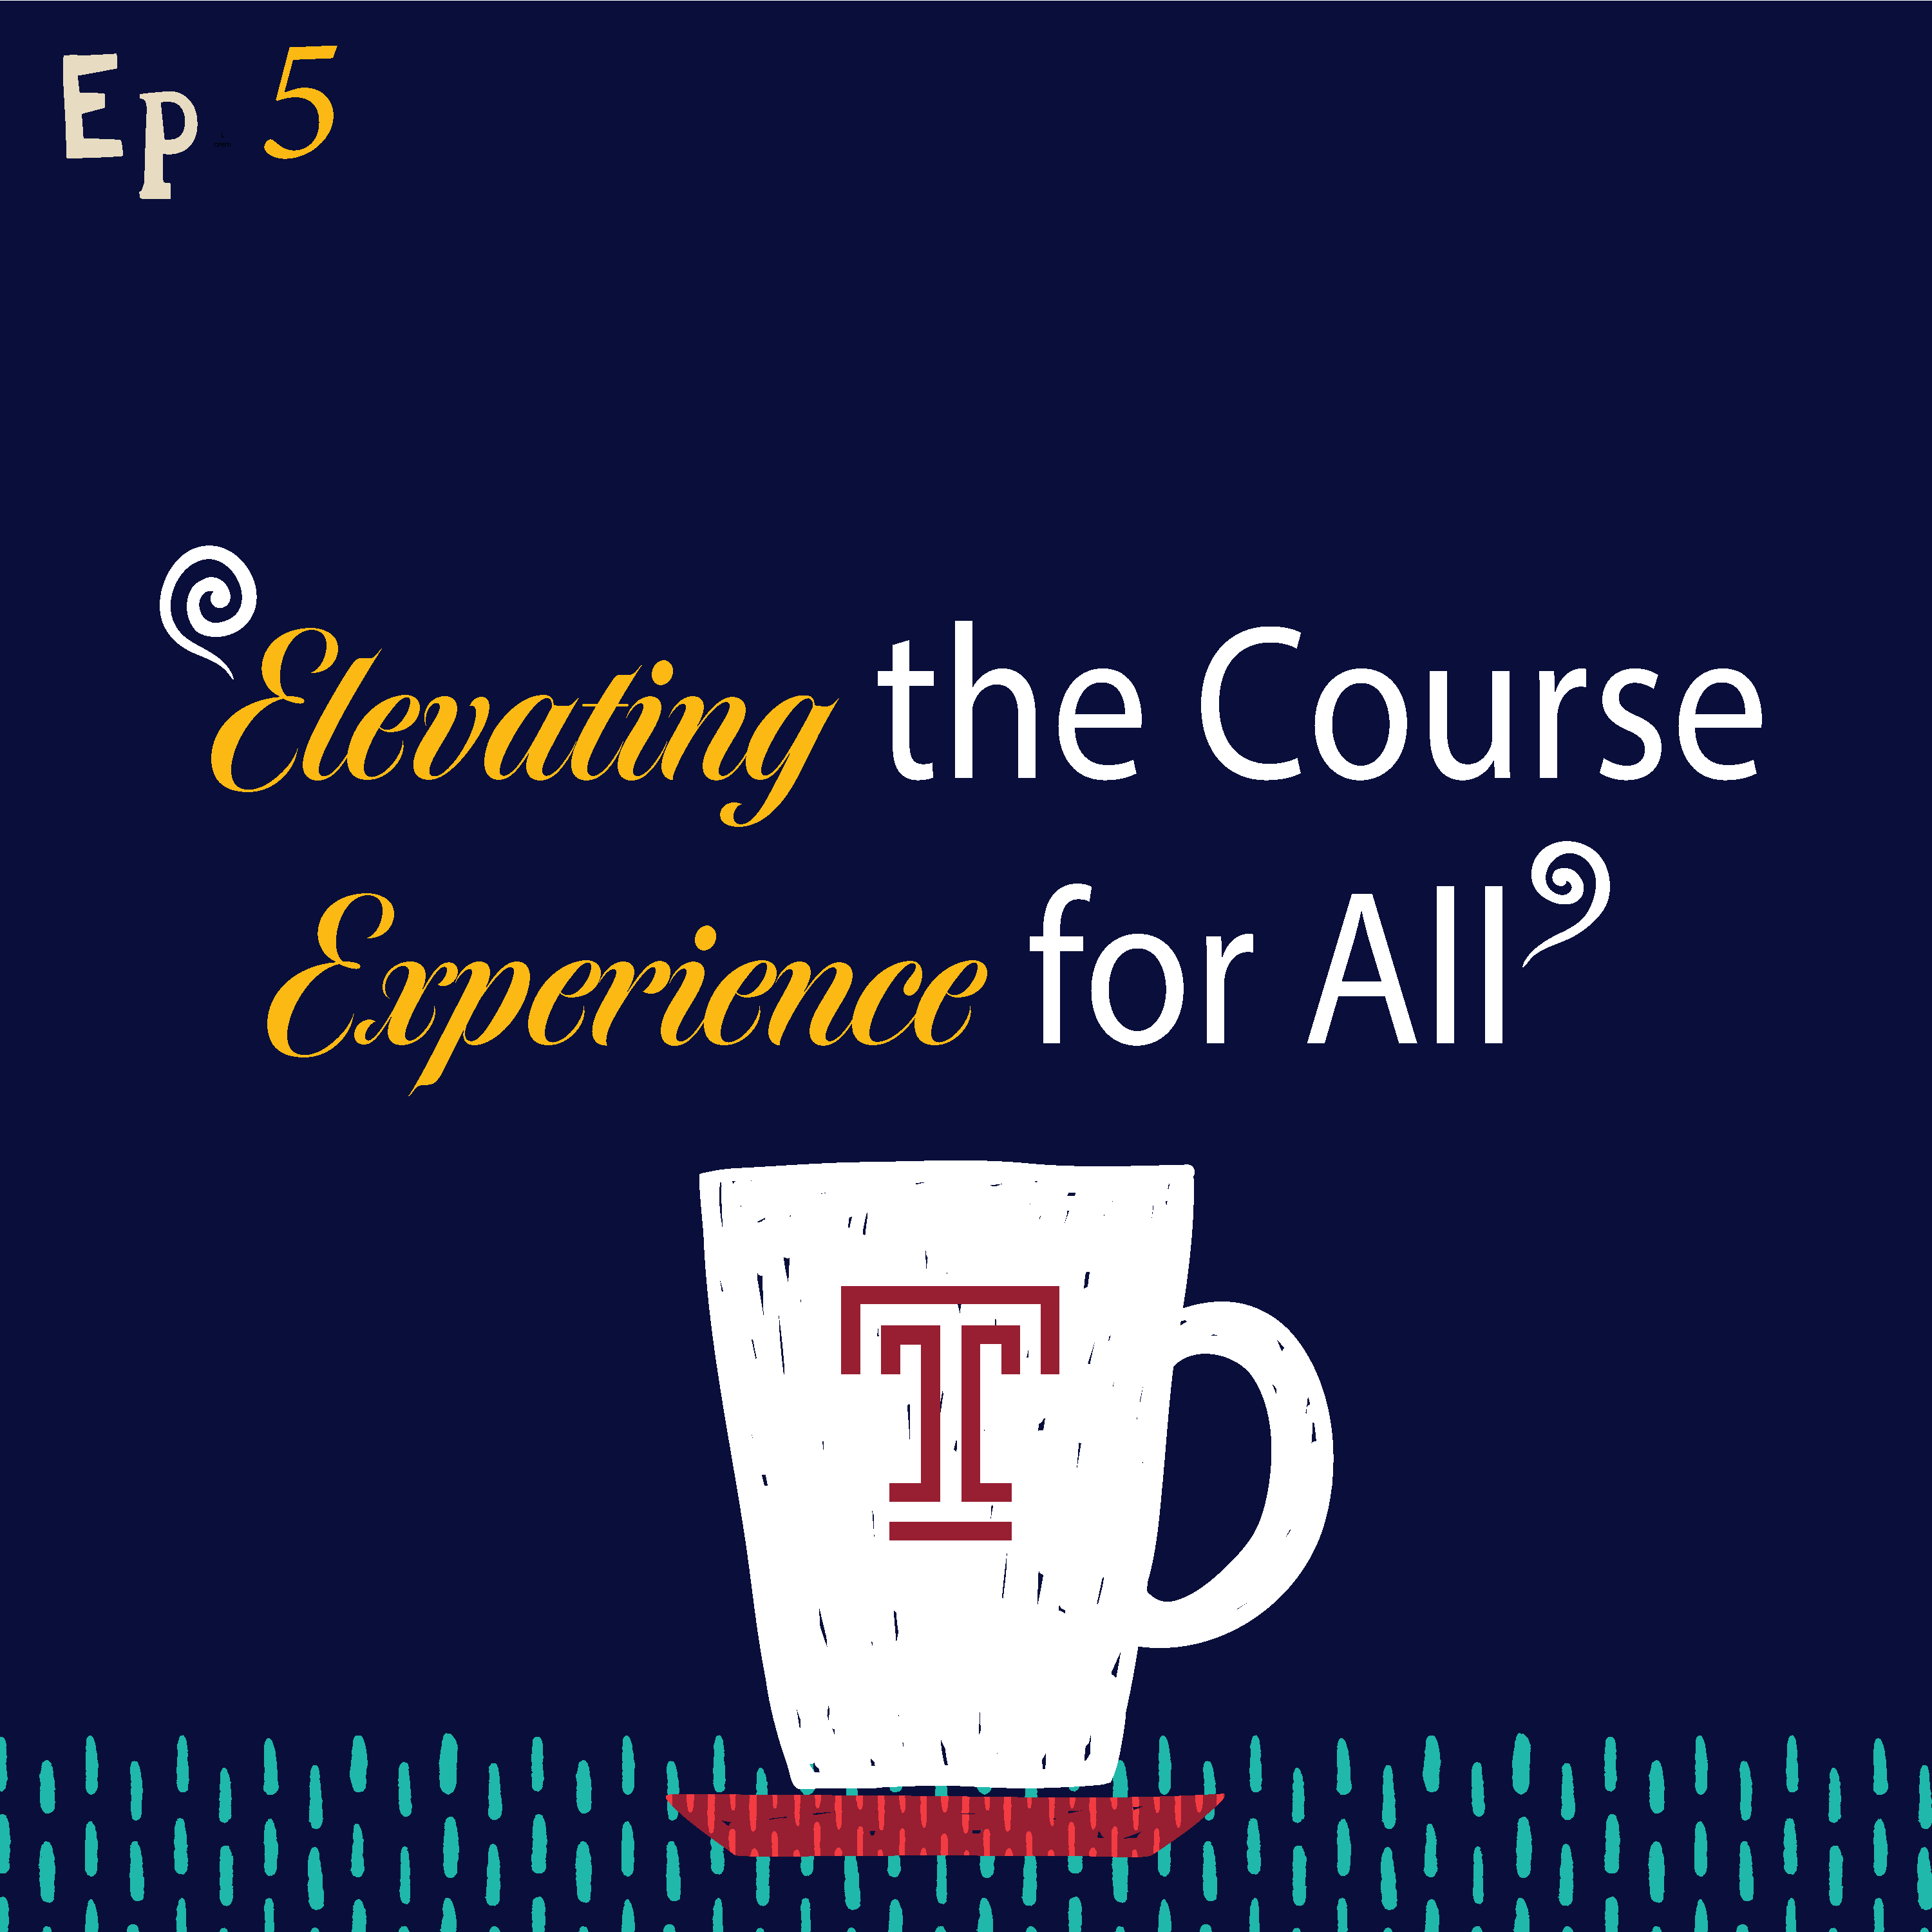 Elevating the Course Experience for All